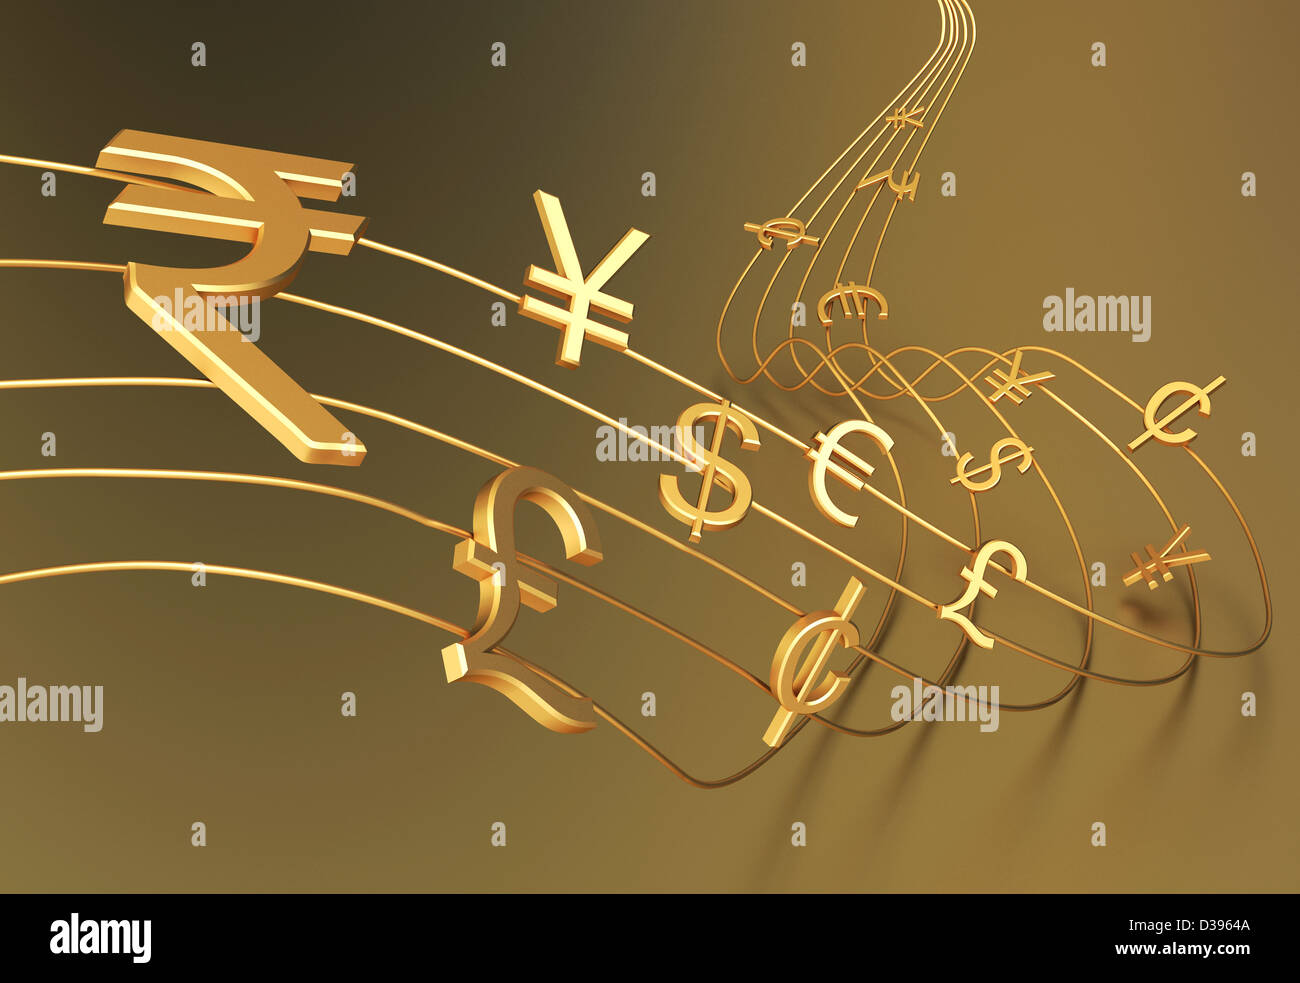 Currencies symbols on musical notation Stock Photo